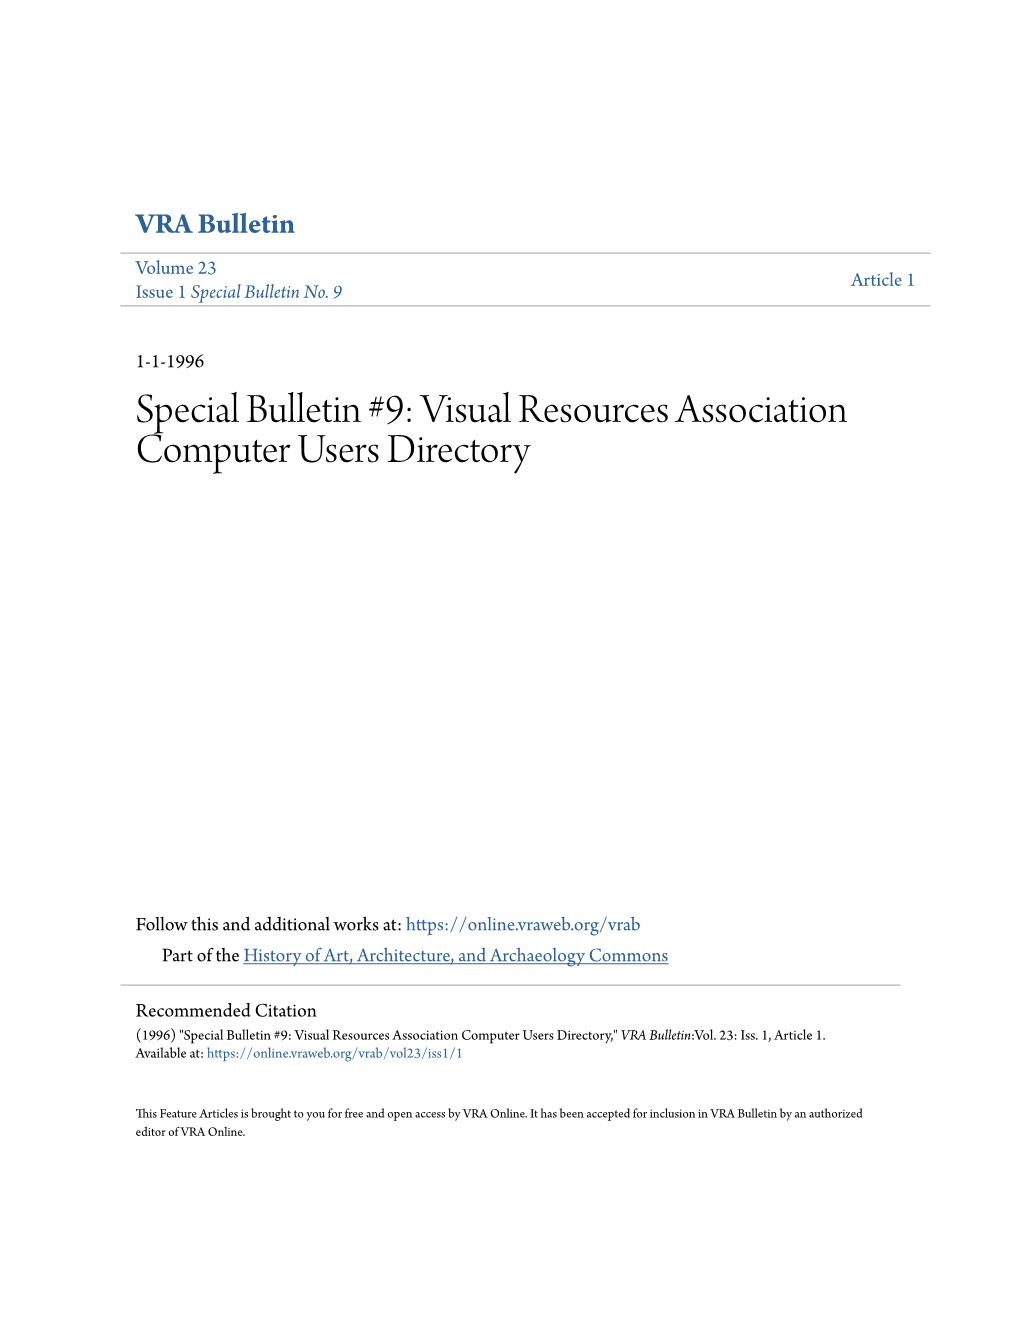 Special Bulletin #9: Visual Resources Association Computer Users Directory